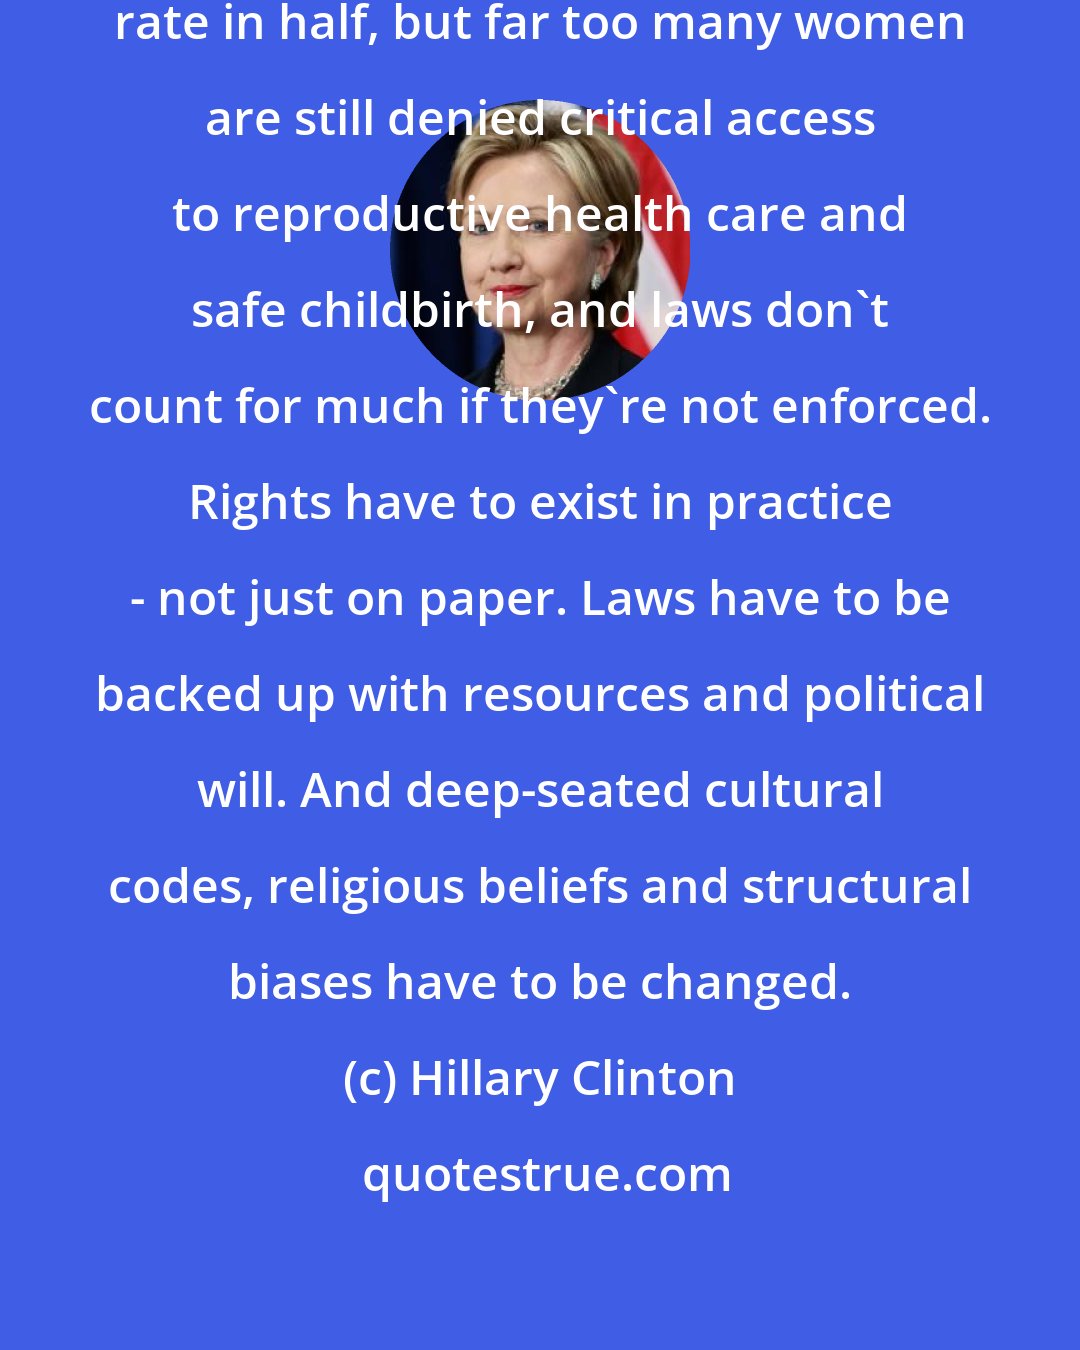 Hillary Clinton: Yes, we've cut the maternal mortality rate in half, but far too many women are still denied critical access to reproductive health care and safe childbirth, and laws don't count for much if they're not enforced. Rights have to exist in practice - not just on paper. Laws have to be backed up with resources and political will. And deep-seated cultural codes, religious beliefs and structural biases have to be changed.